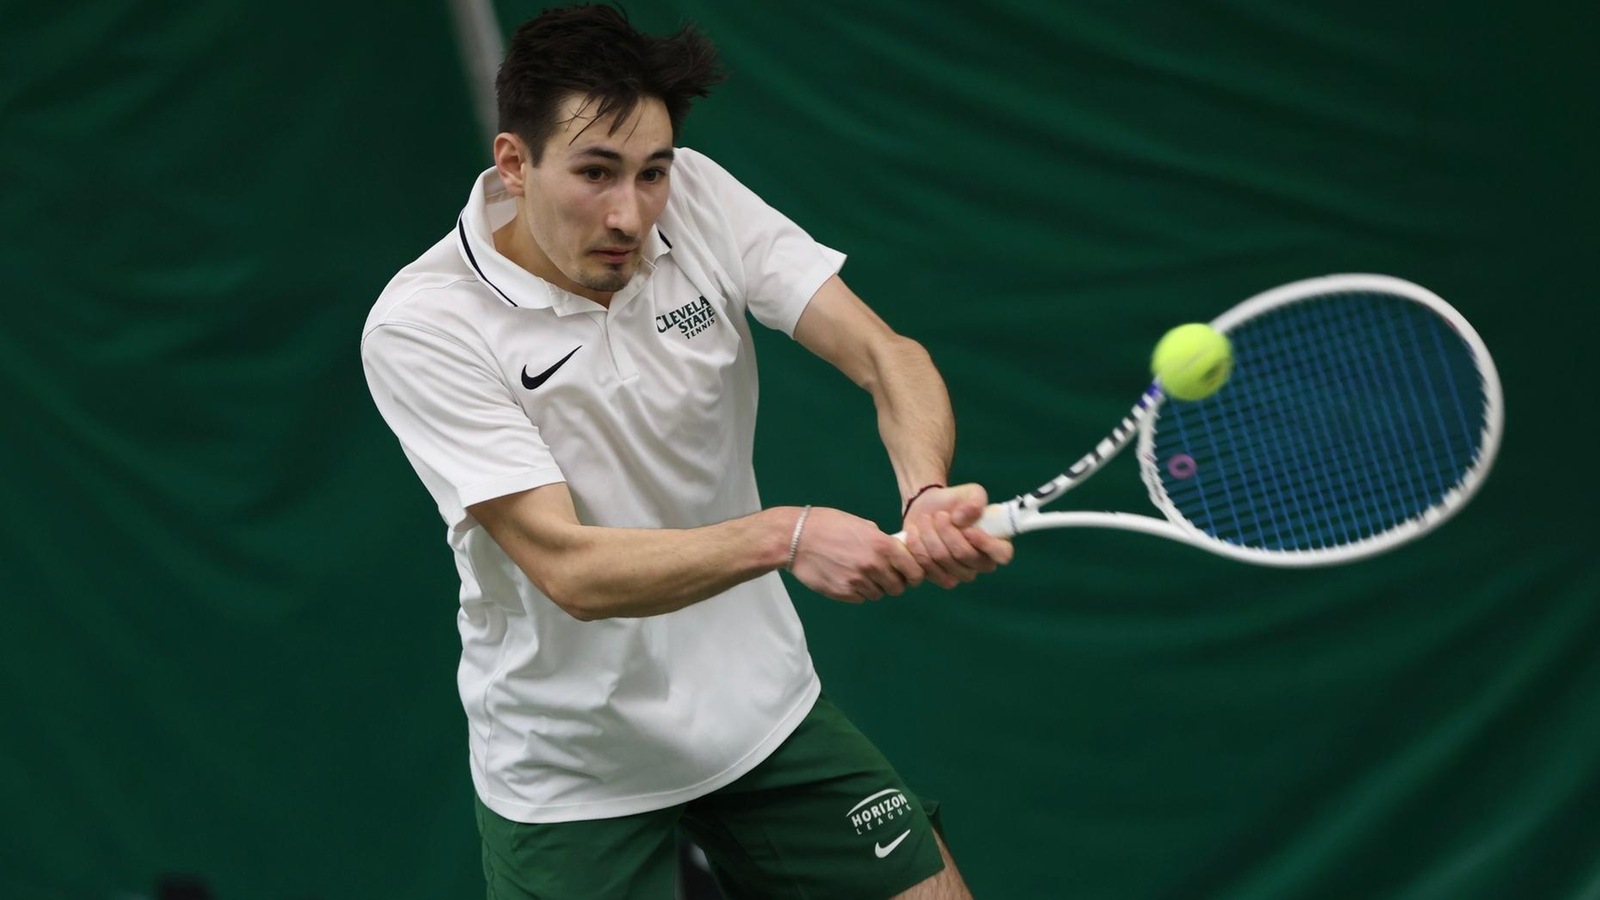 Cleveland State Men’s Tennis Earns 5-2 Win Against Texas A&M-Corpus Christi